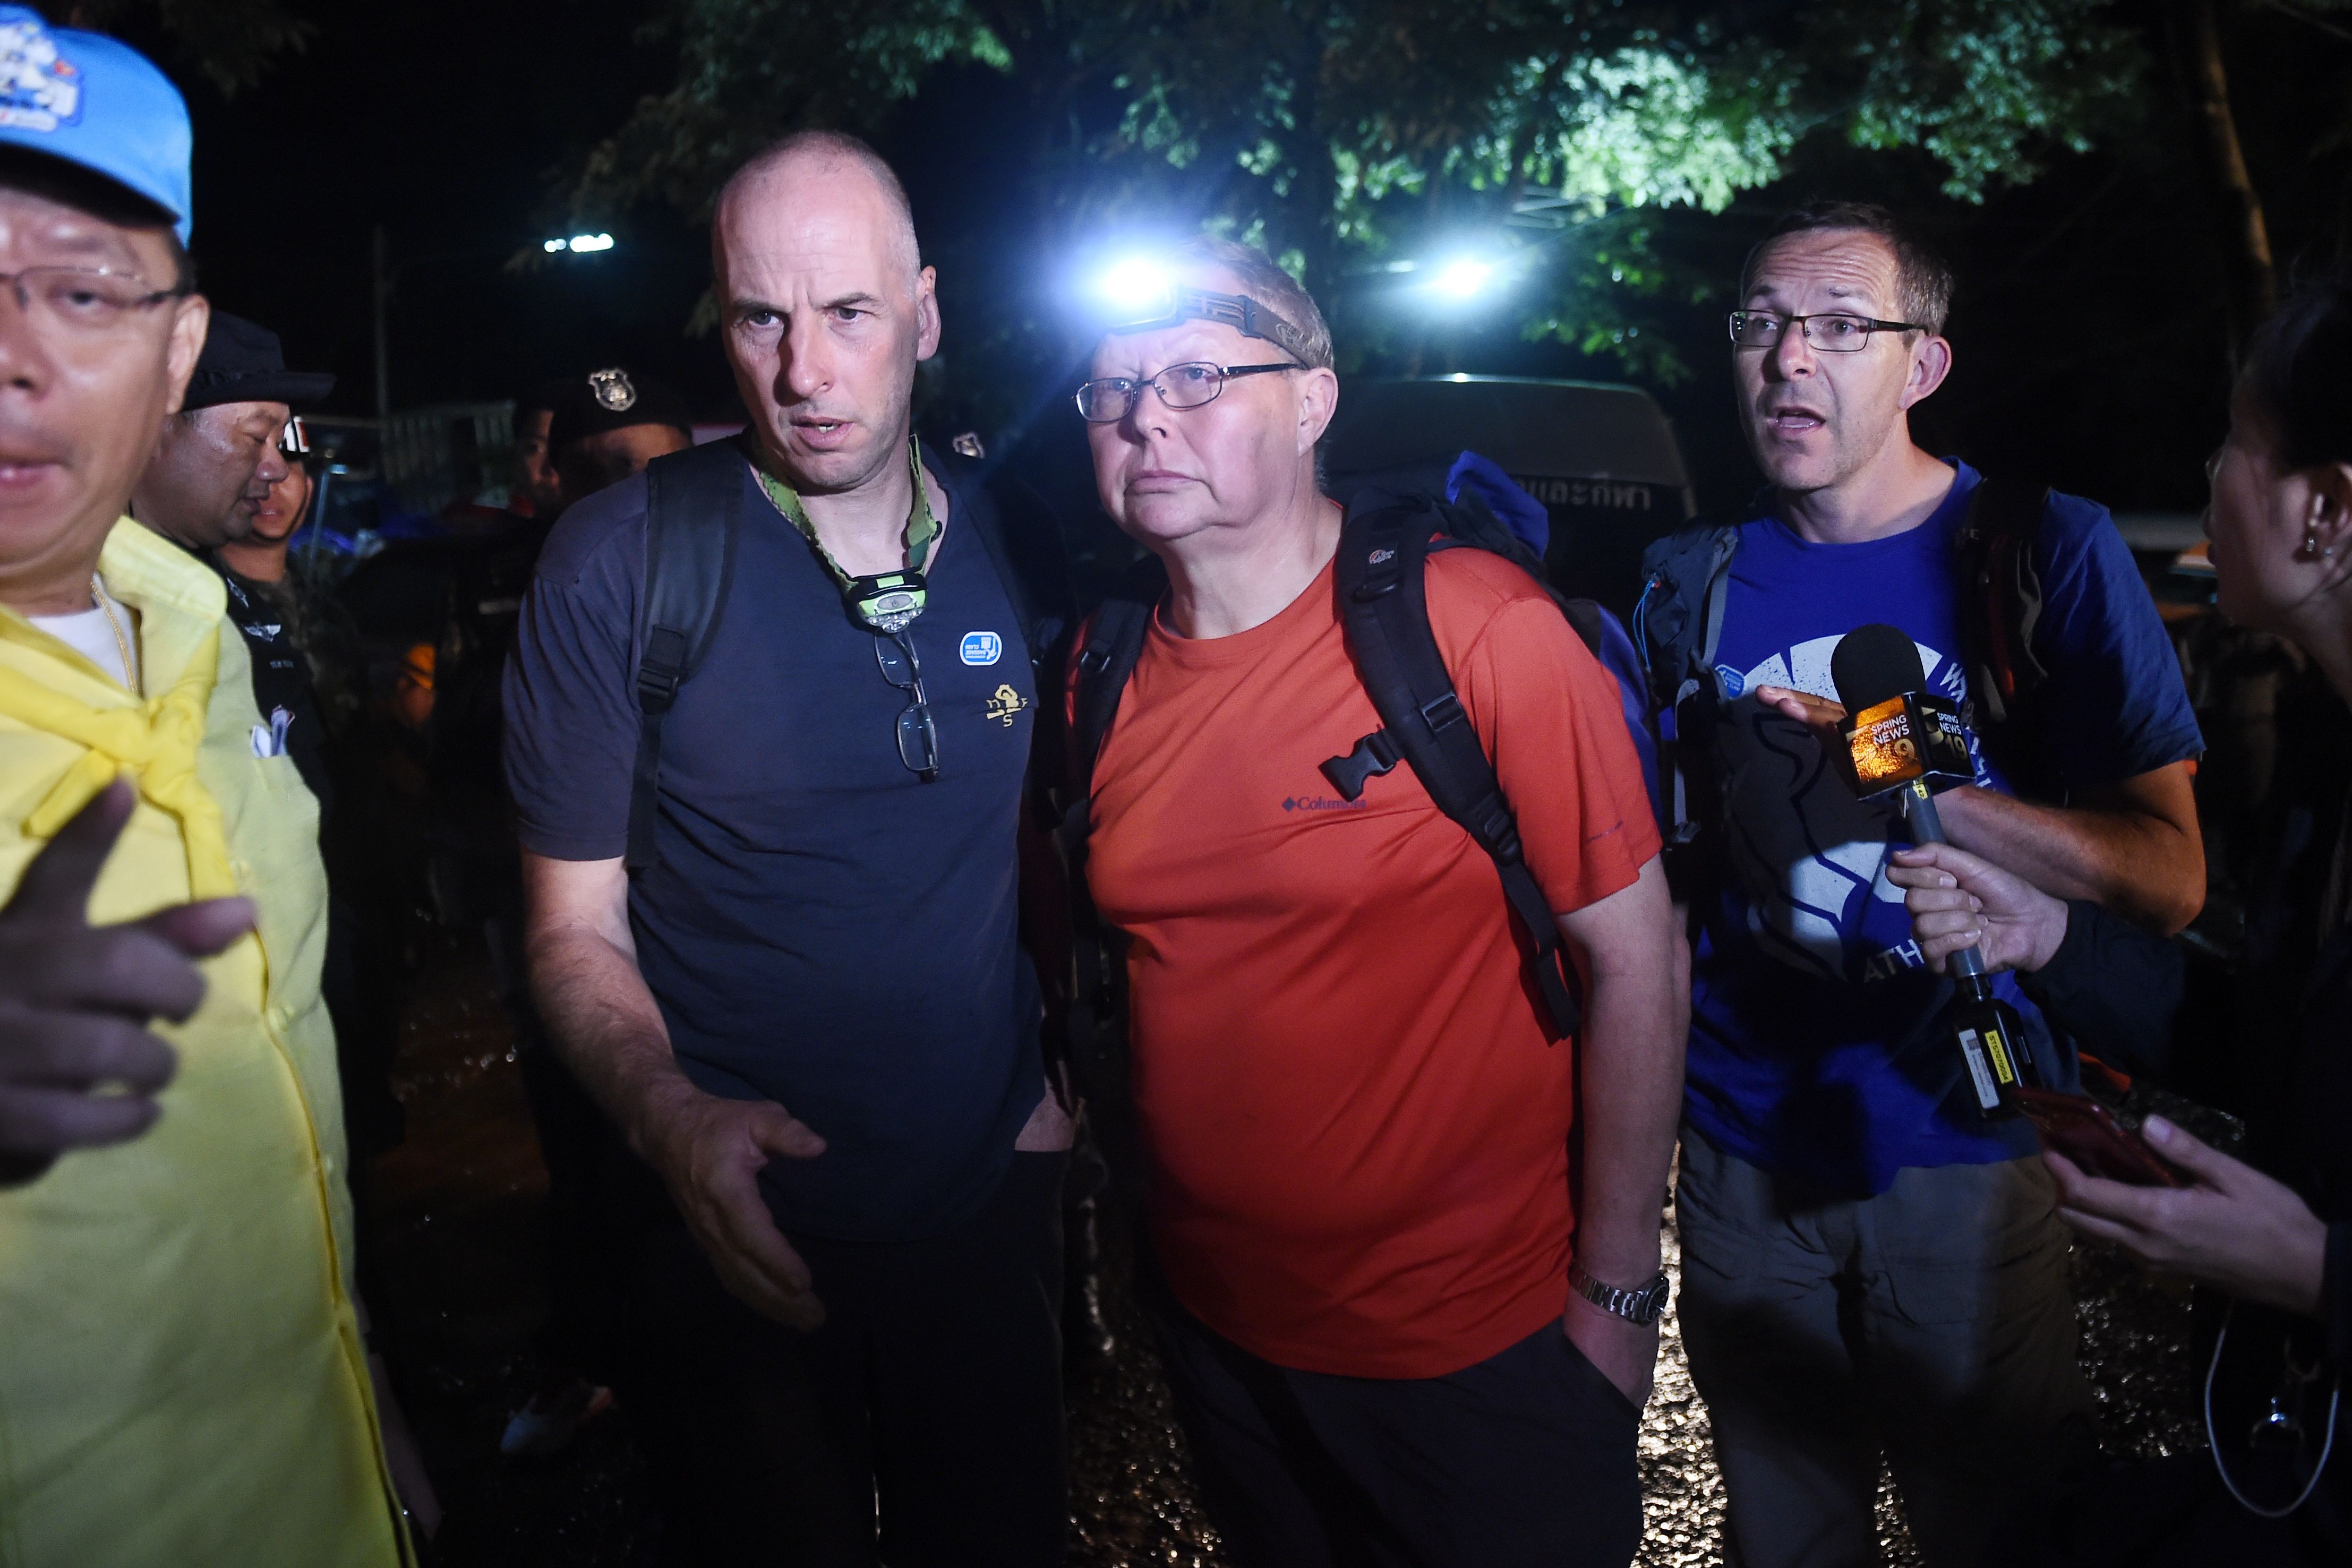 Three British cave-divers, Richard William Stanton (2nd-L), Robert Charles Harper (3rd-L) and John Volanthen (R) near the Tham Luang cave in Chiang Rai on June 27, 2018. (Lillian Suwanrumpha—AFP/Getty Images)